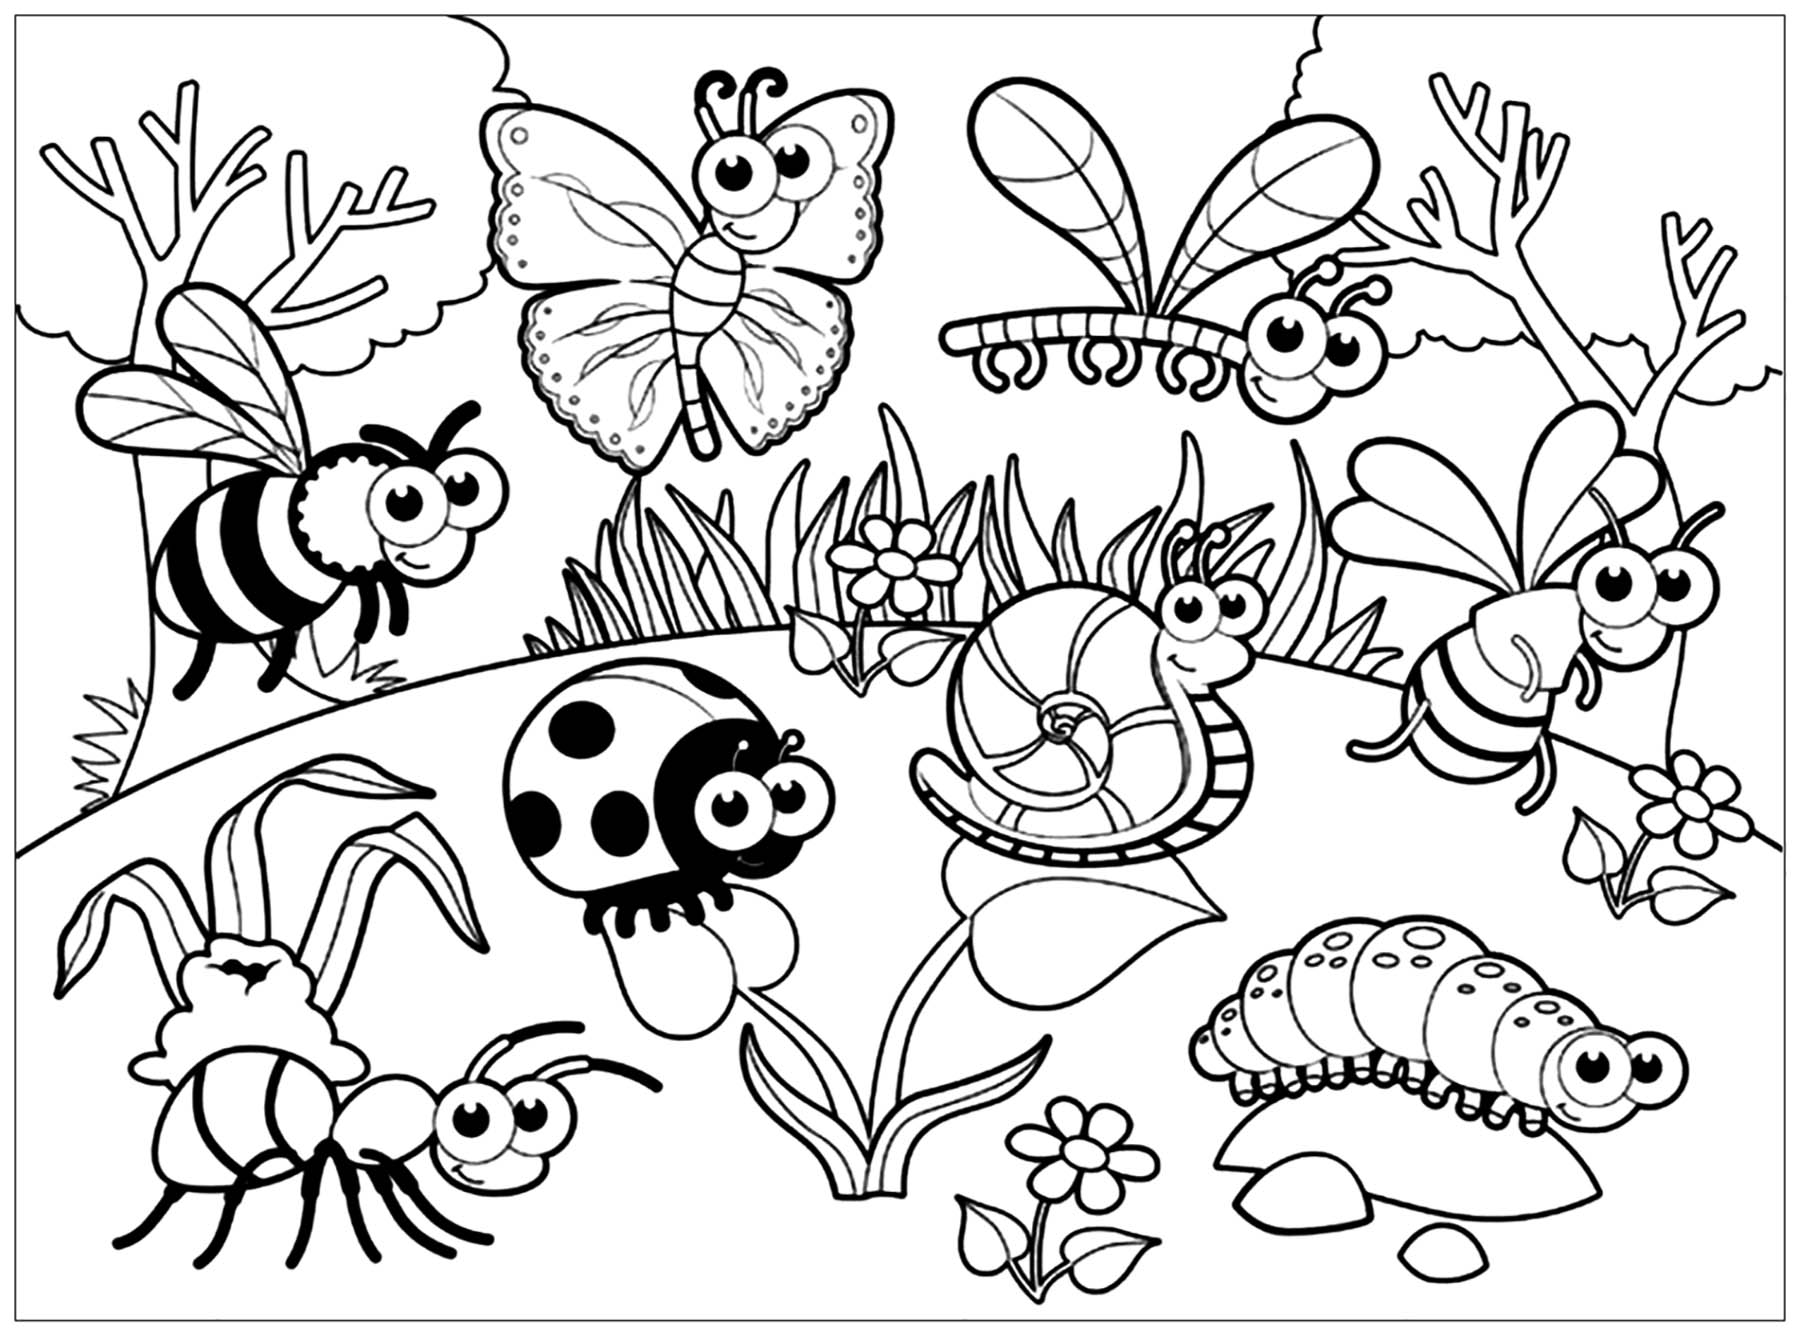 coloring-pages-for-kids-insects-color-pictures-email-pictures-and-more-with-these-insect